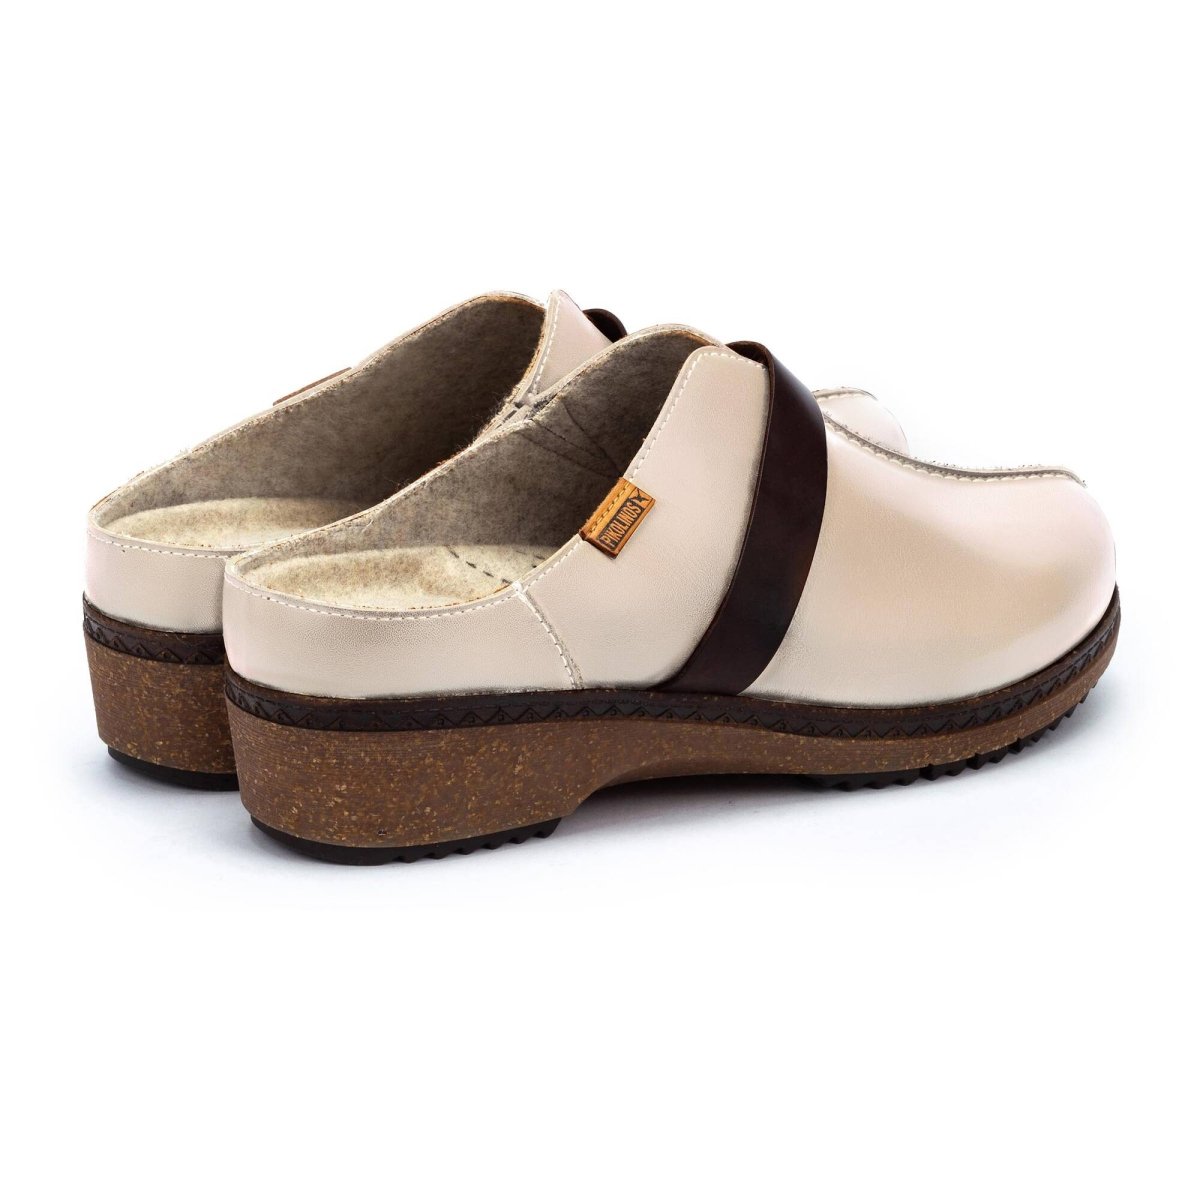 PIKOLINOS GRANADA W0W-3590C1 WOMEN'S LOAFERS CLOG SHOES IN MARFIL - TLW Shoes